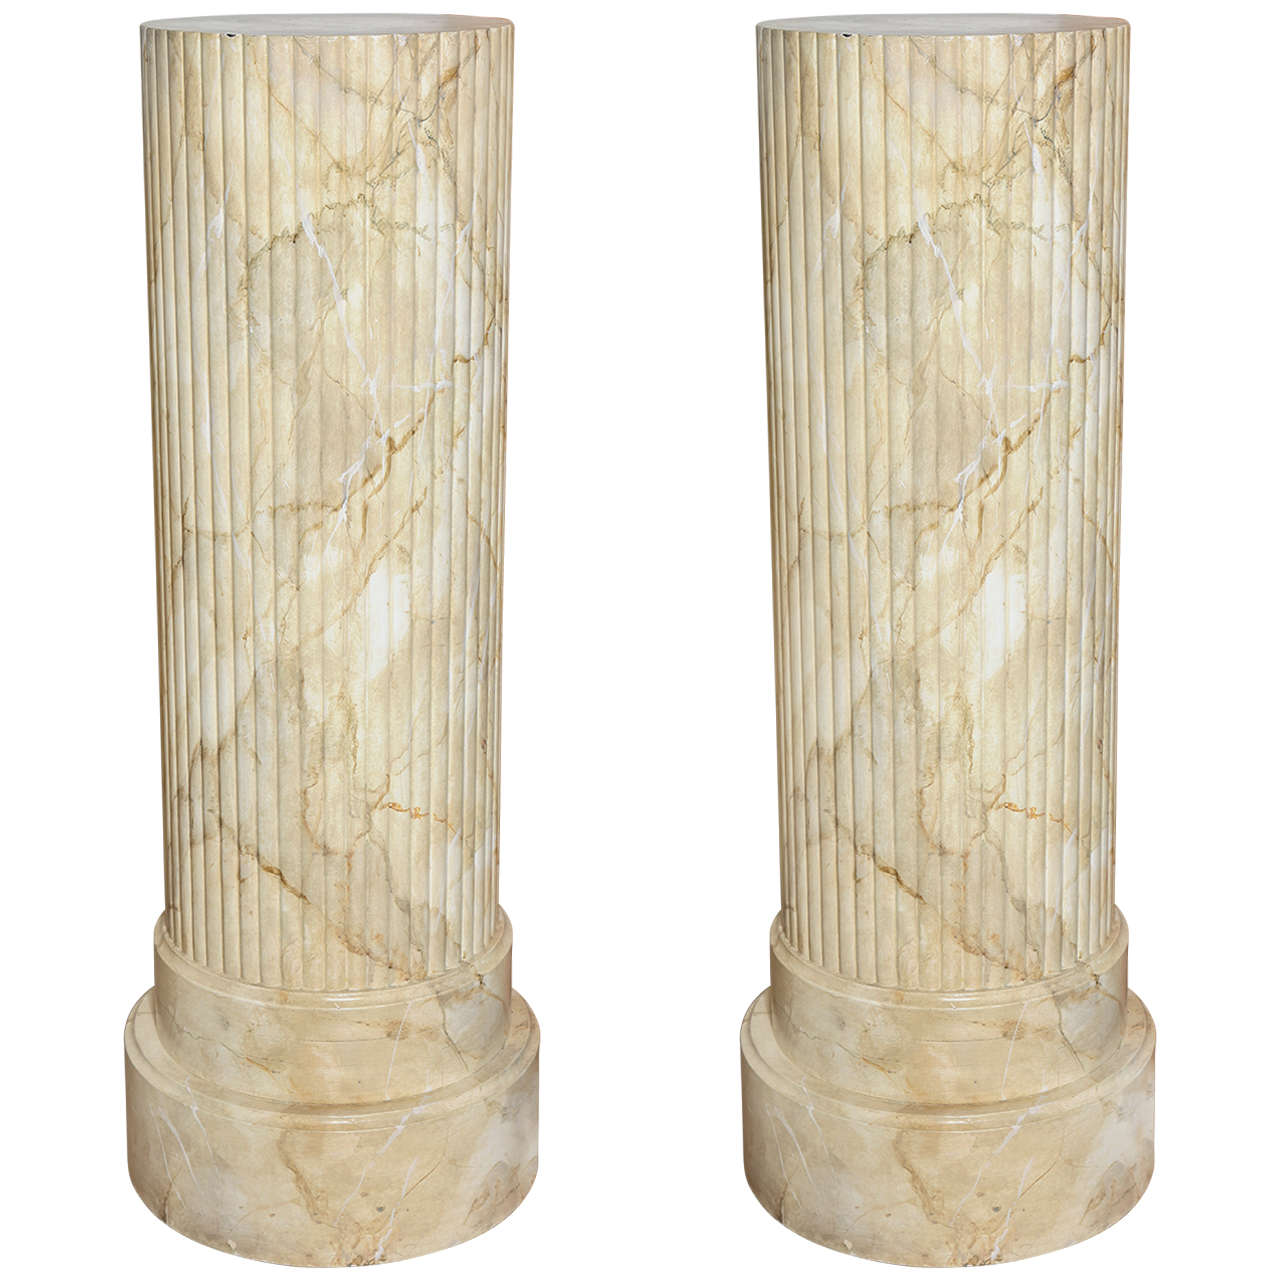 A Pair of Carved and Faux Marbled Pedestals, c. 1930 For Sale